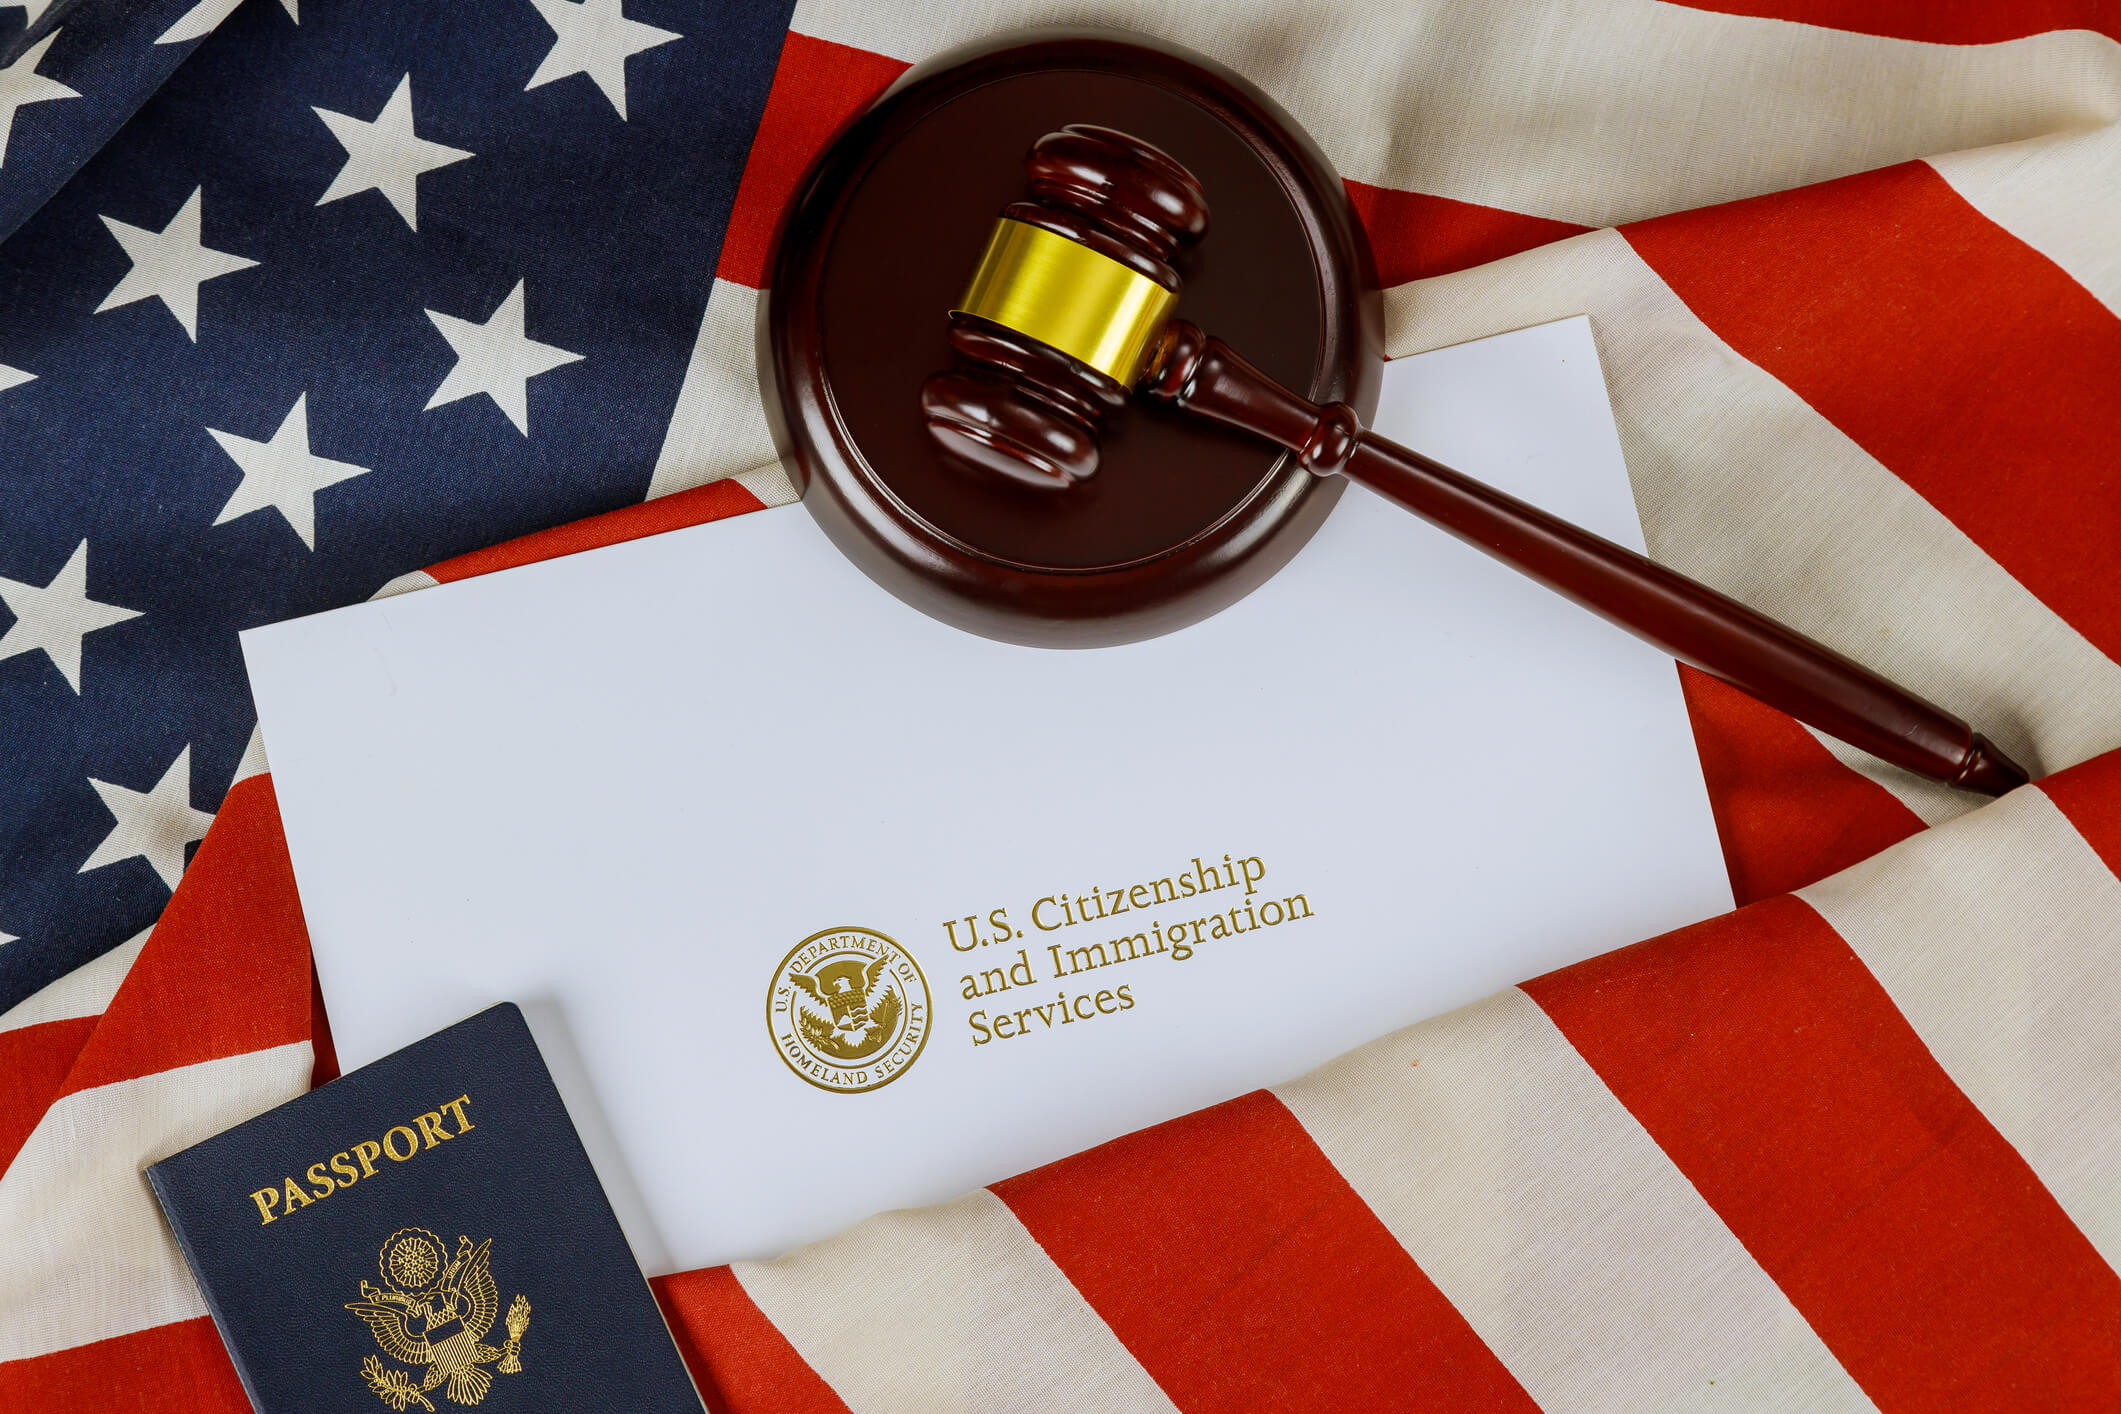 a united states flag with a wooden gavel and document that says u.s immigration services representing the need for an immigration lawyer